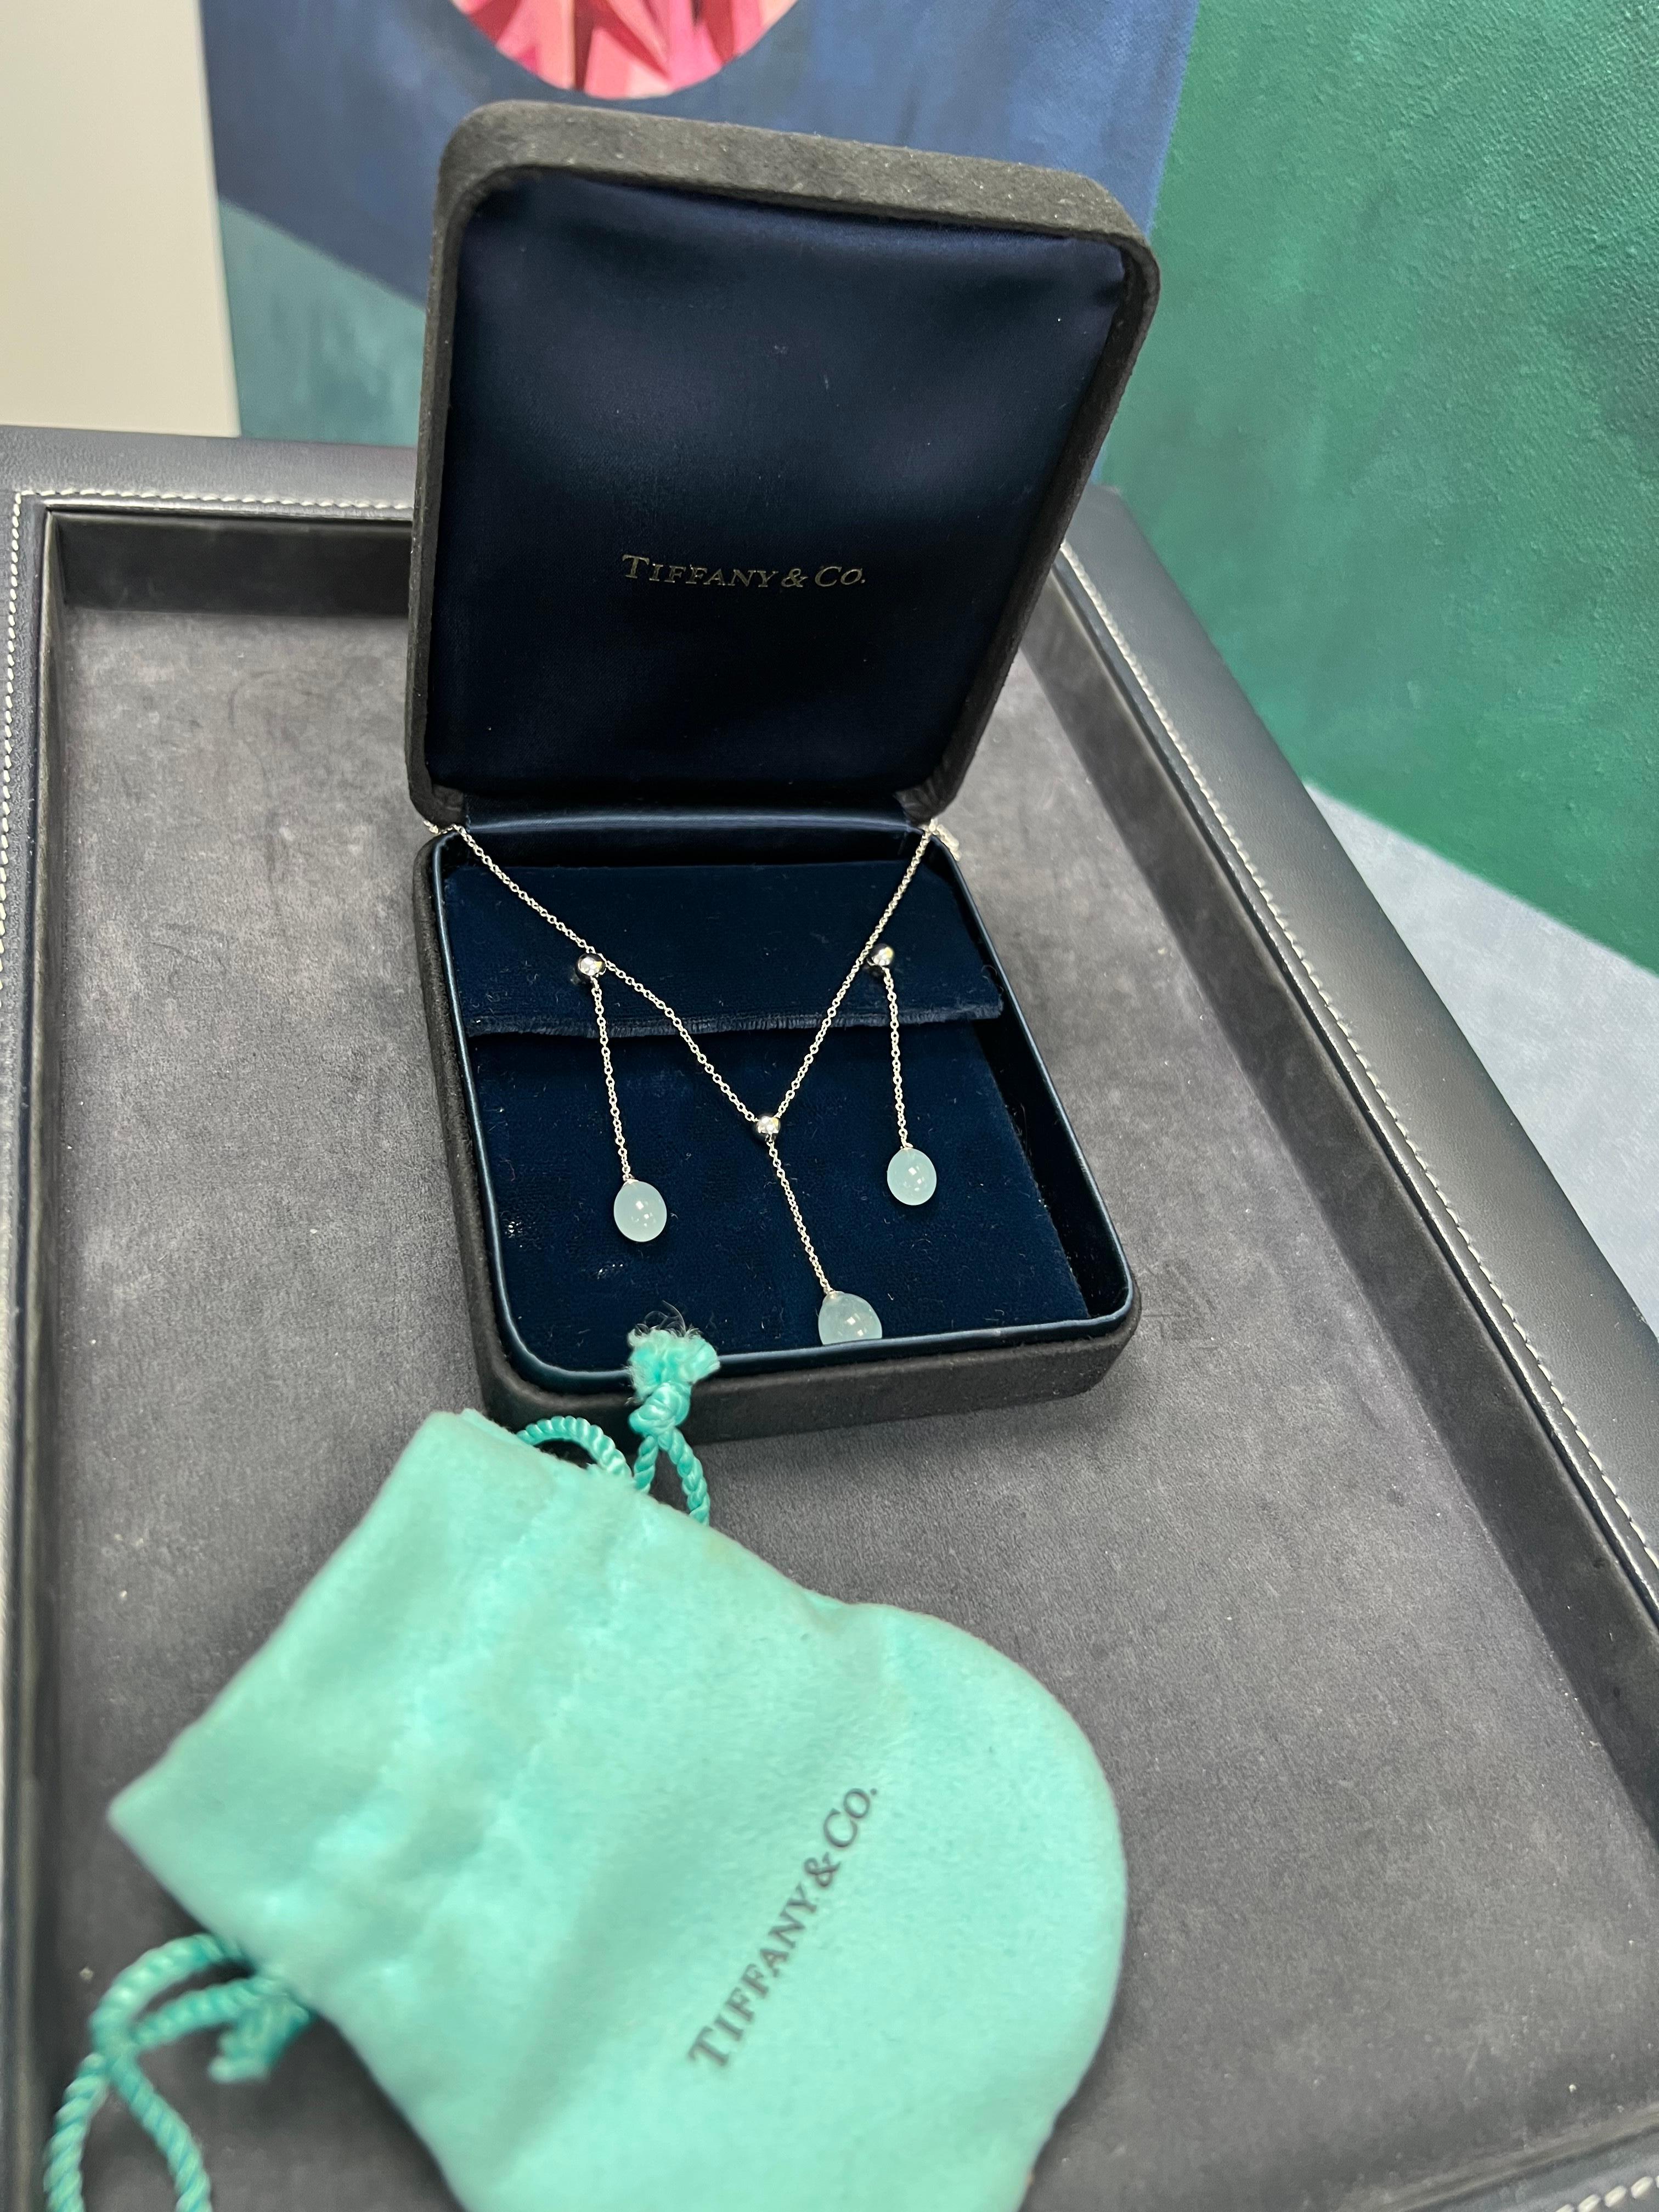 Original Tiffany & Co White Gold Natural Aquamarine Drop Earring and Pendant Set For Sale 2